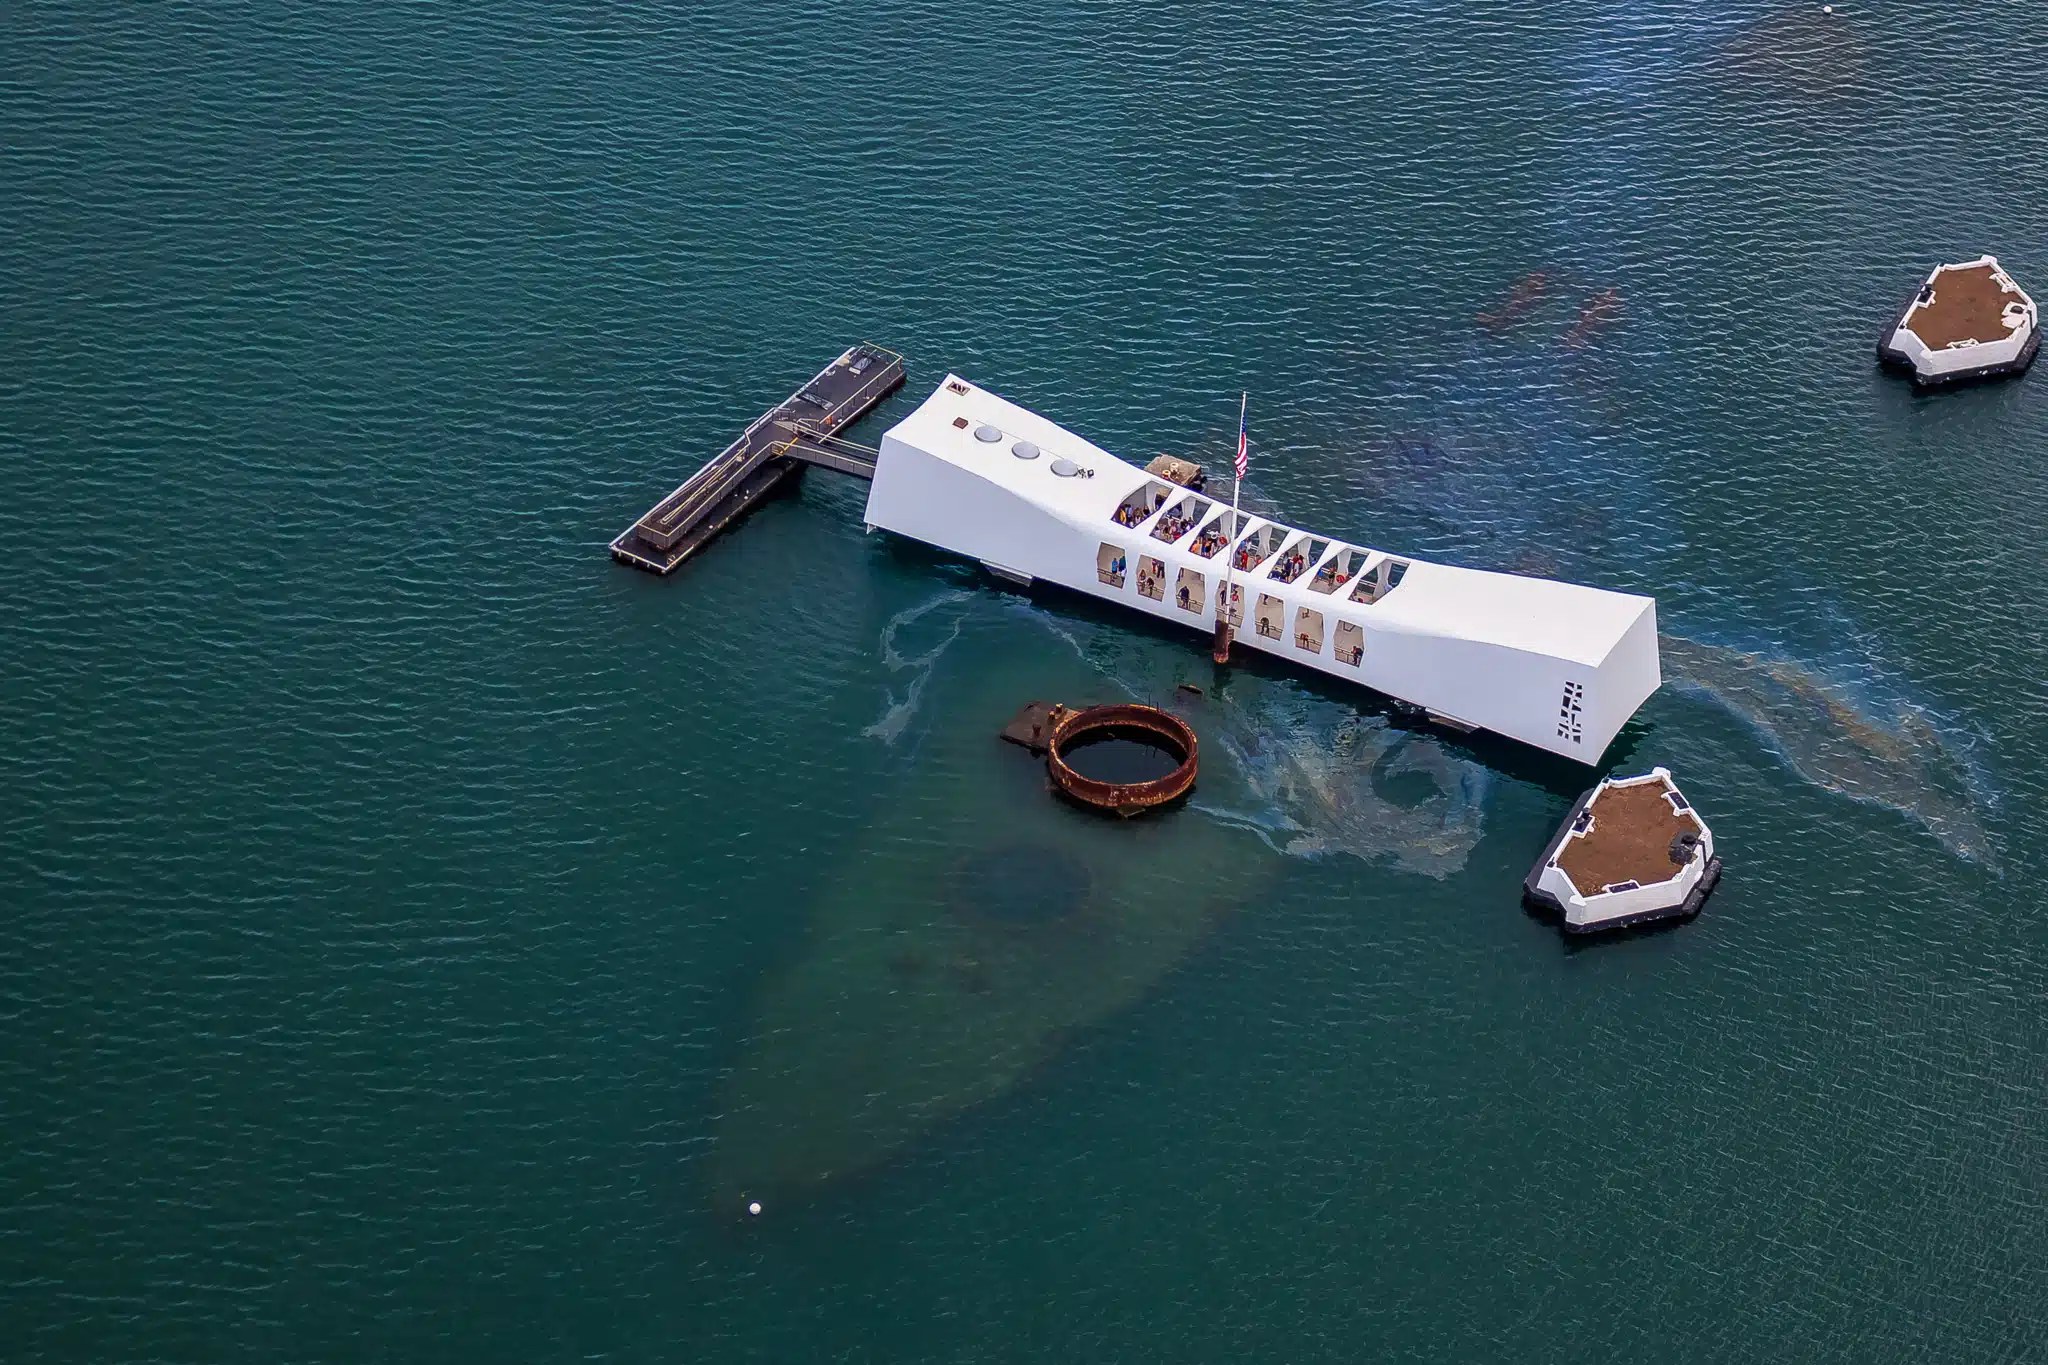 Pearl Harbor National Memorial is a Heritage Site located in the city of Honolulu on Oahu, Hawaii